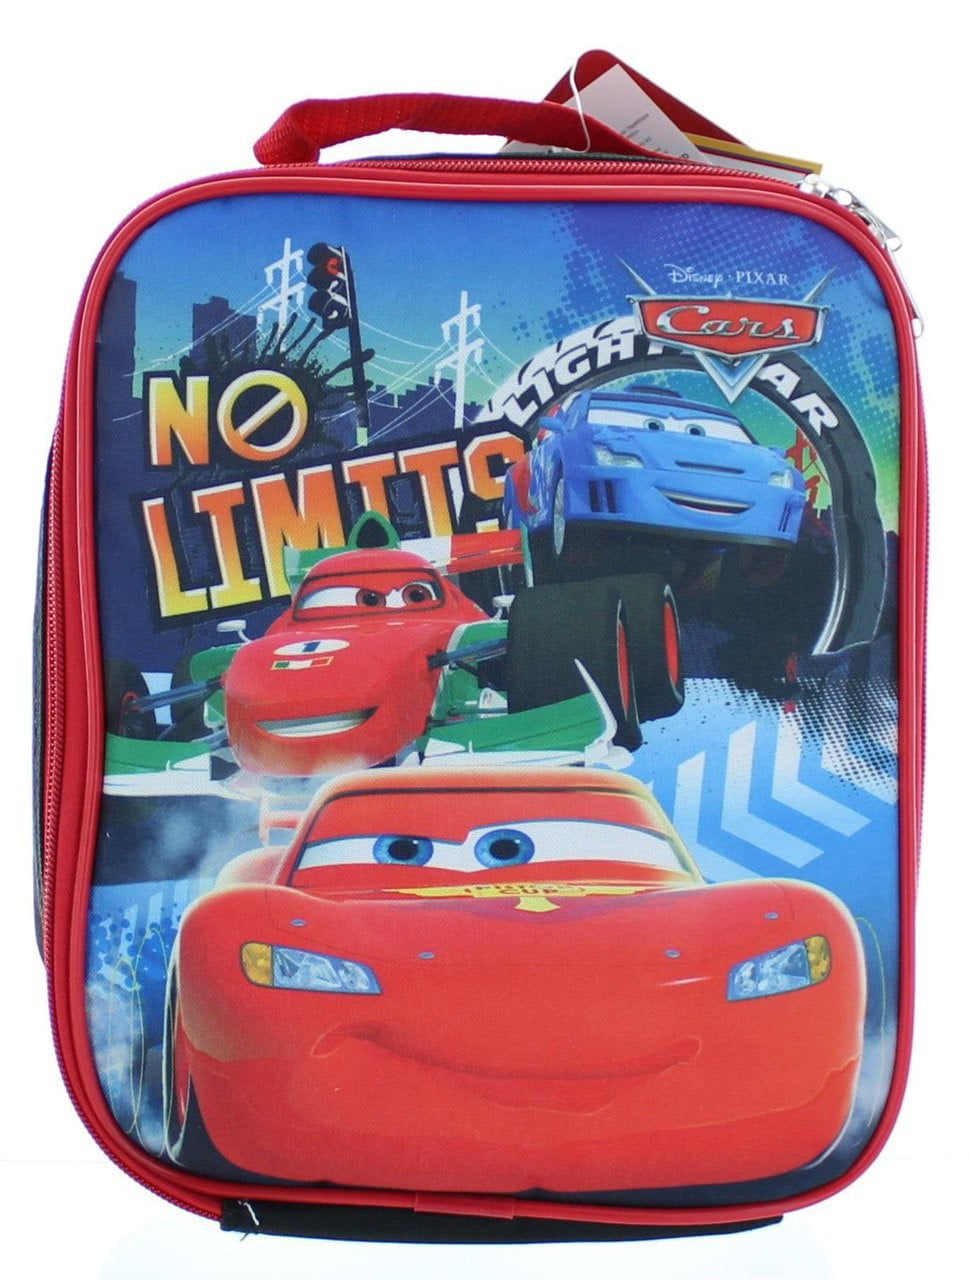 New Free shipping. Disney Pixar Cars Lunch Pale complete set 